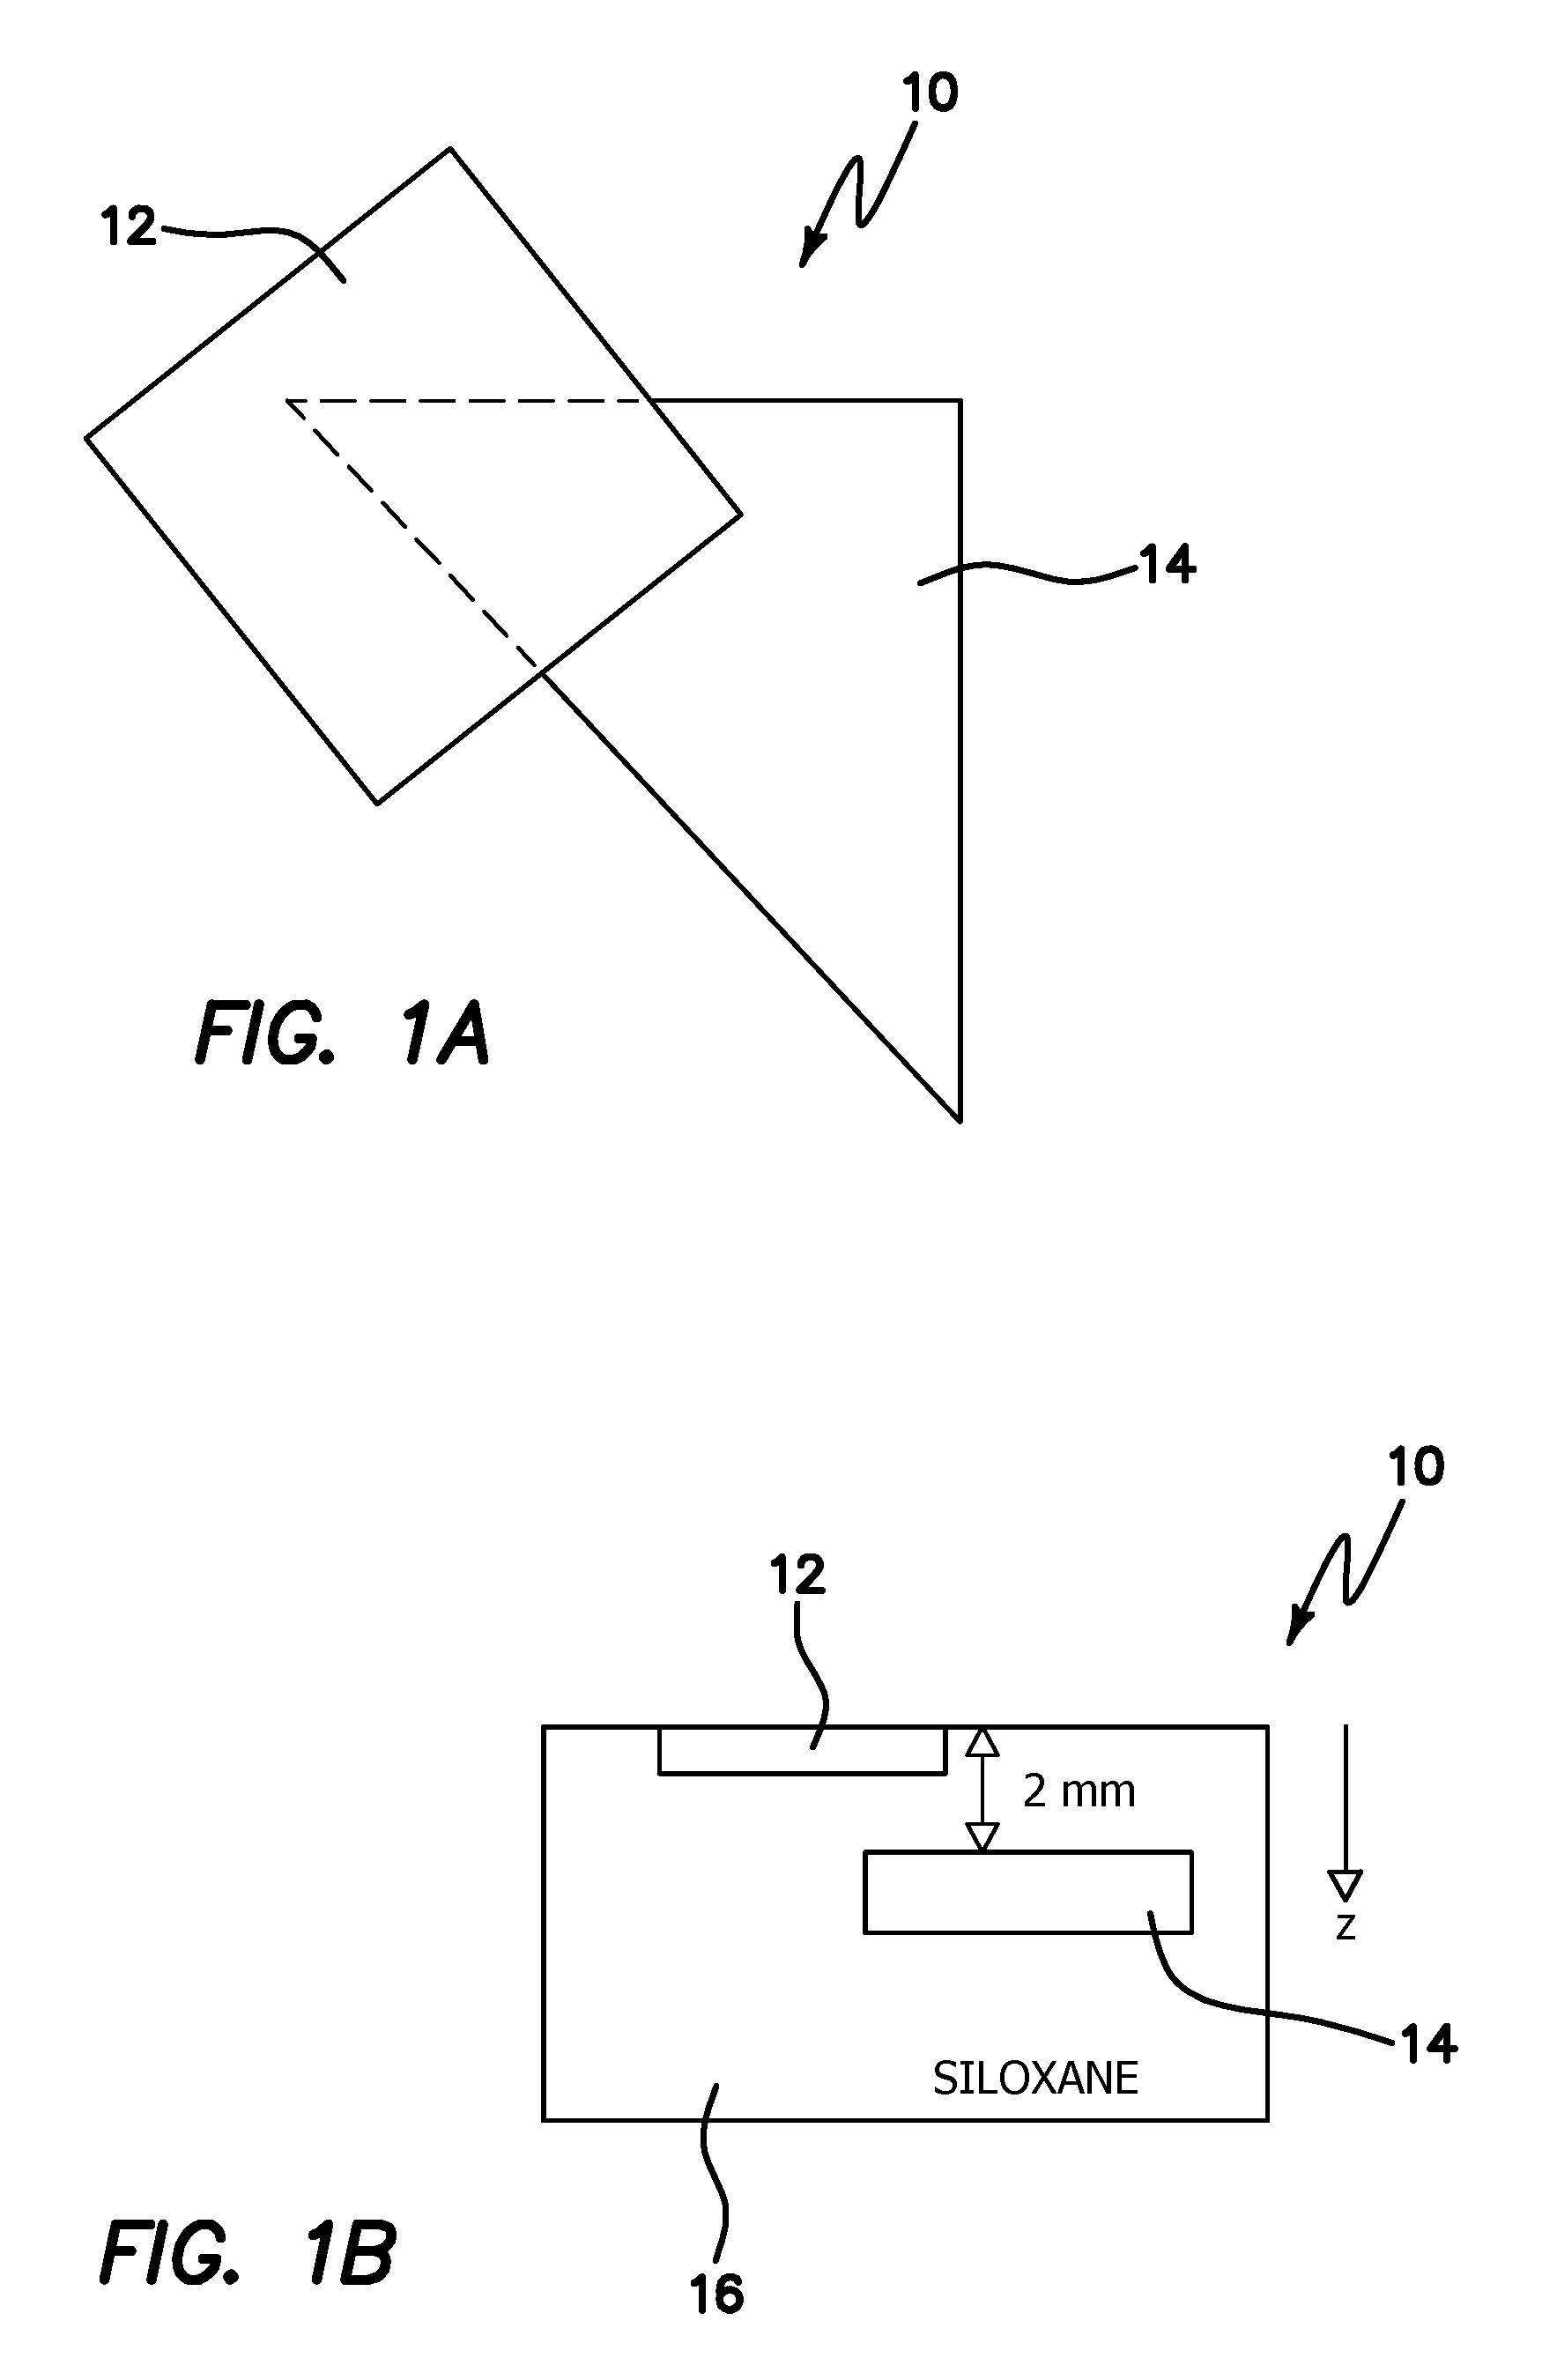 Method and apparatus for high resolution spatially modulated fluorescence imaging and tomography